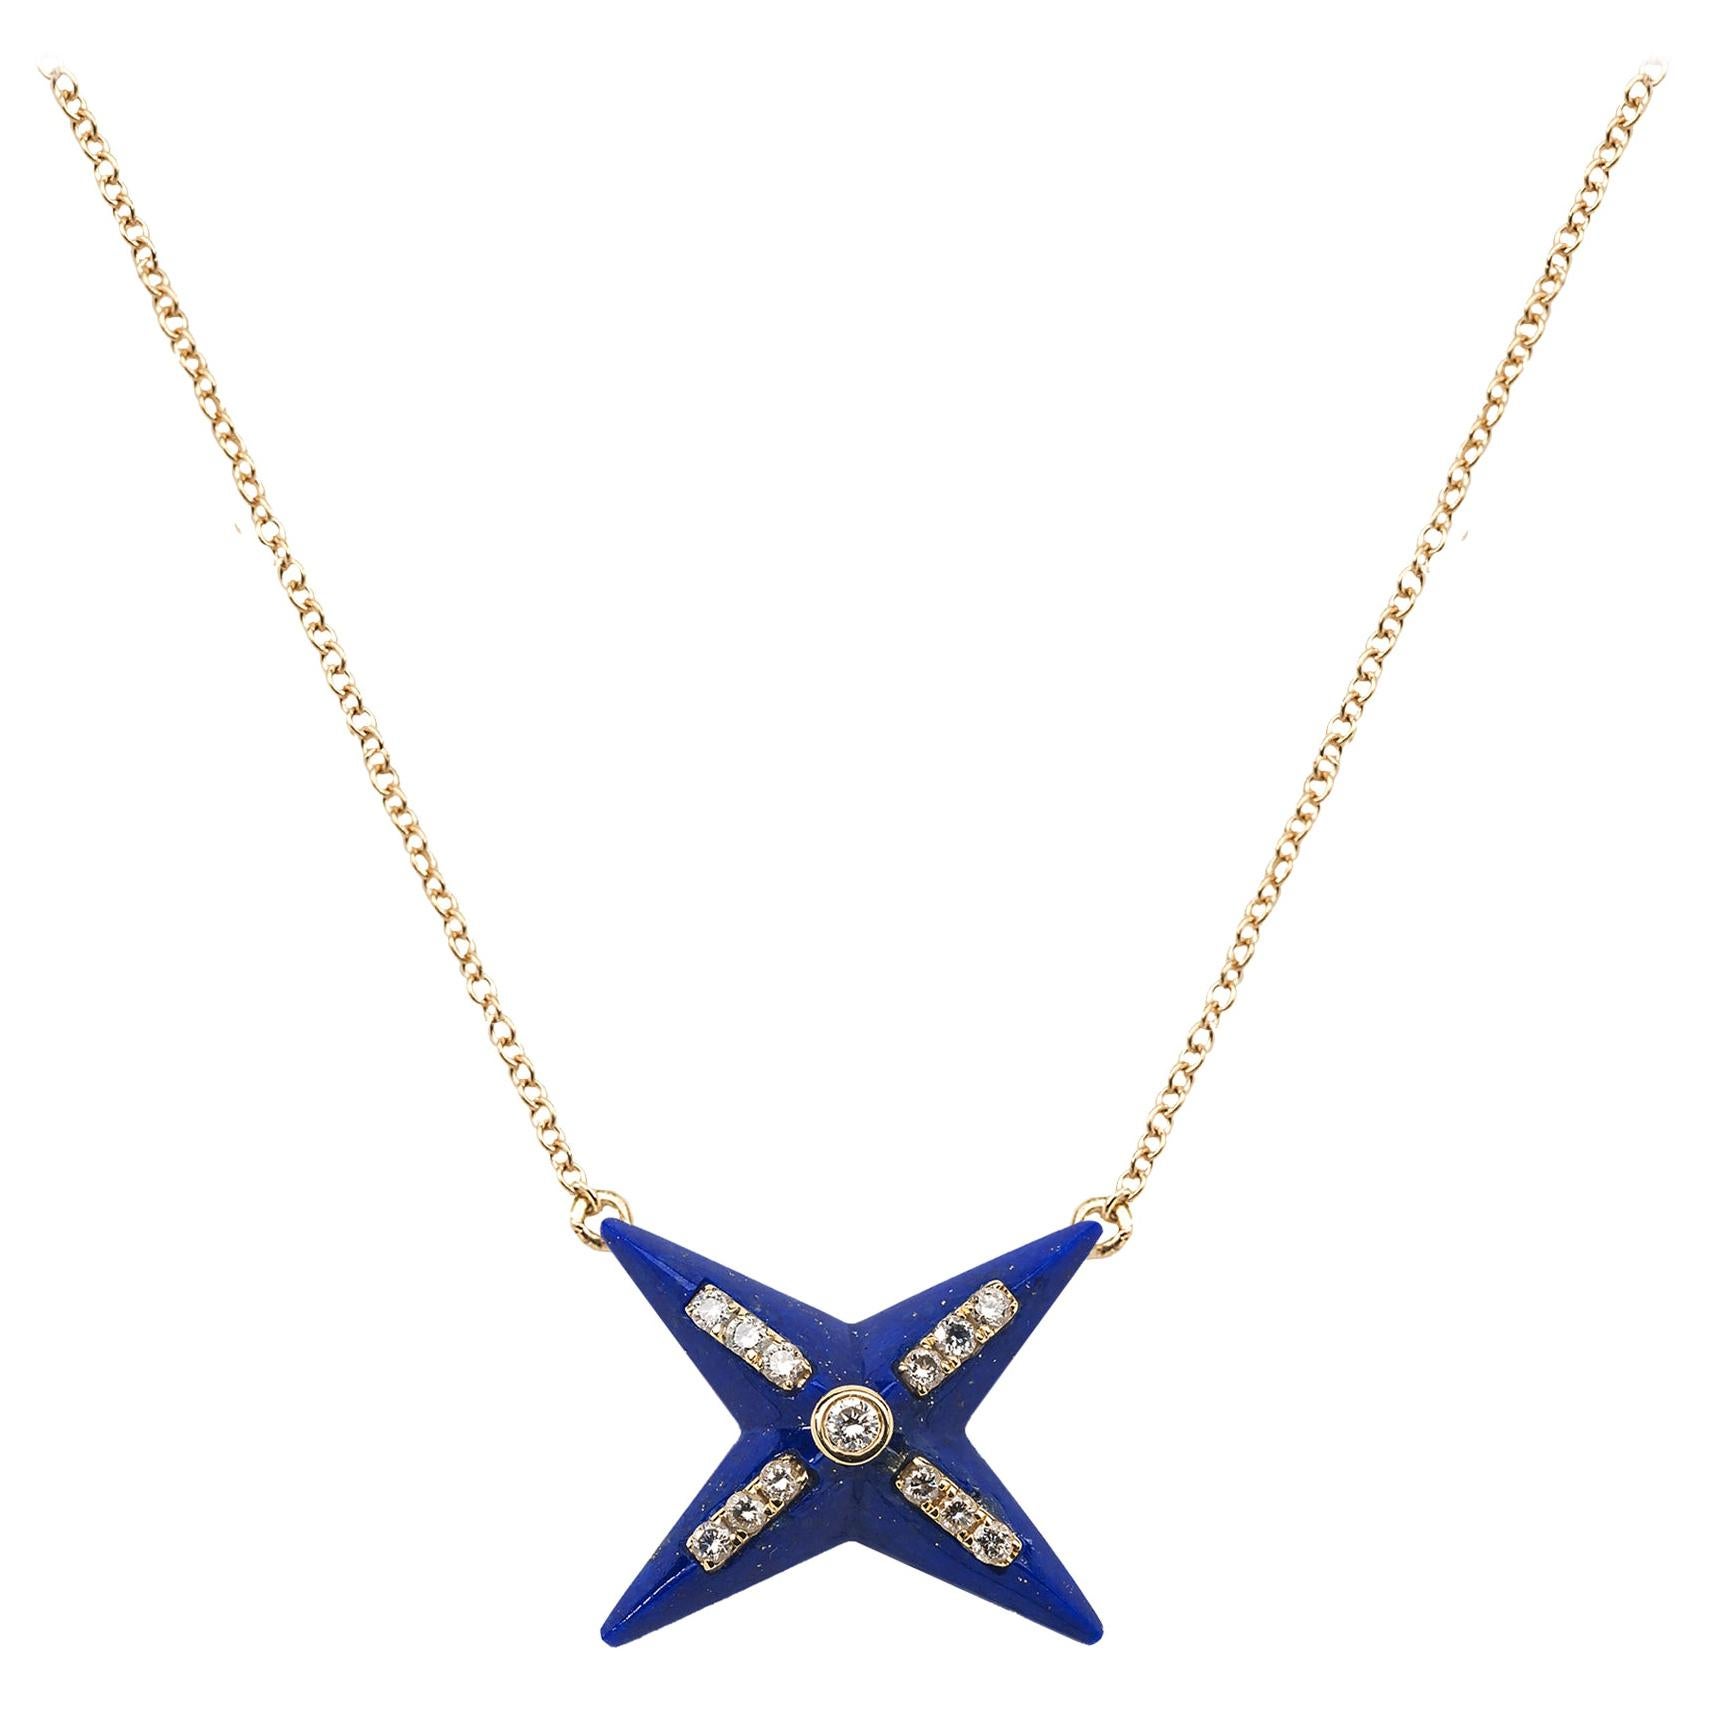 Remembrance Lapis and Diamond 4 Star with Diamonds Along Spikes Charm Pendant